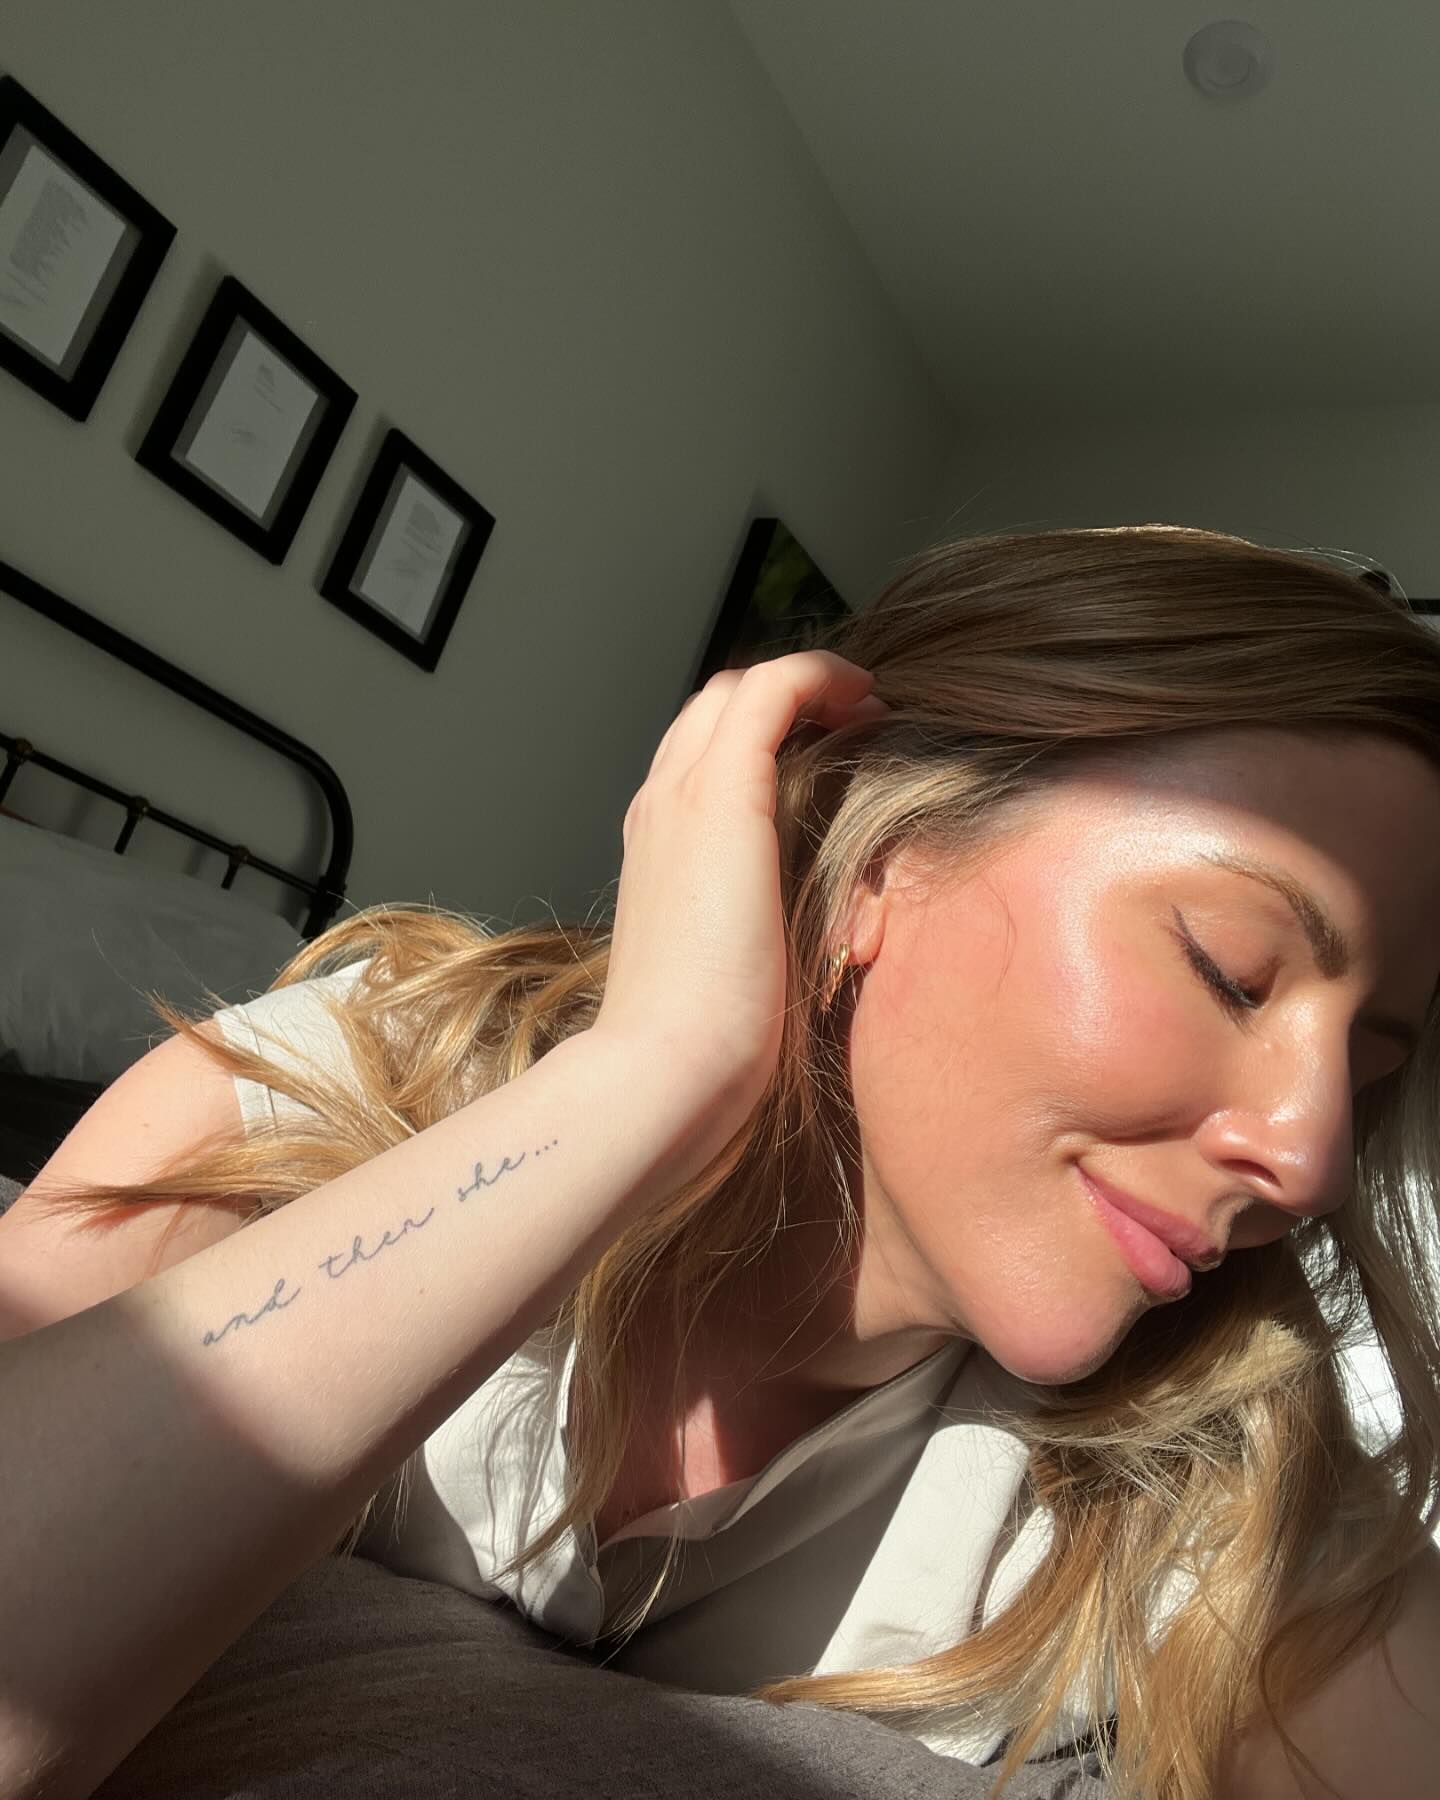 Danielle Maltby flaunting her new tattoo